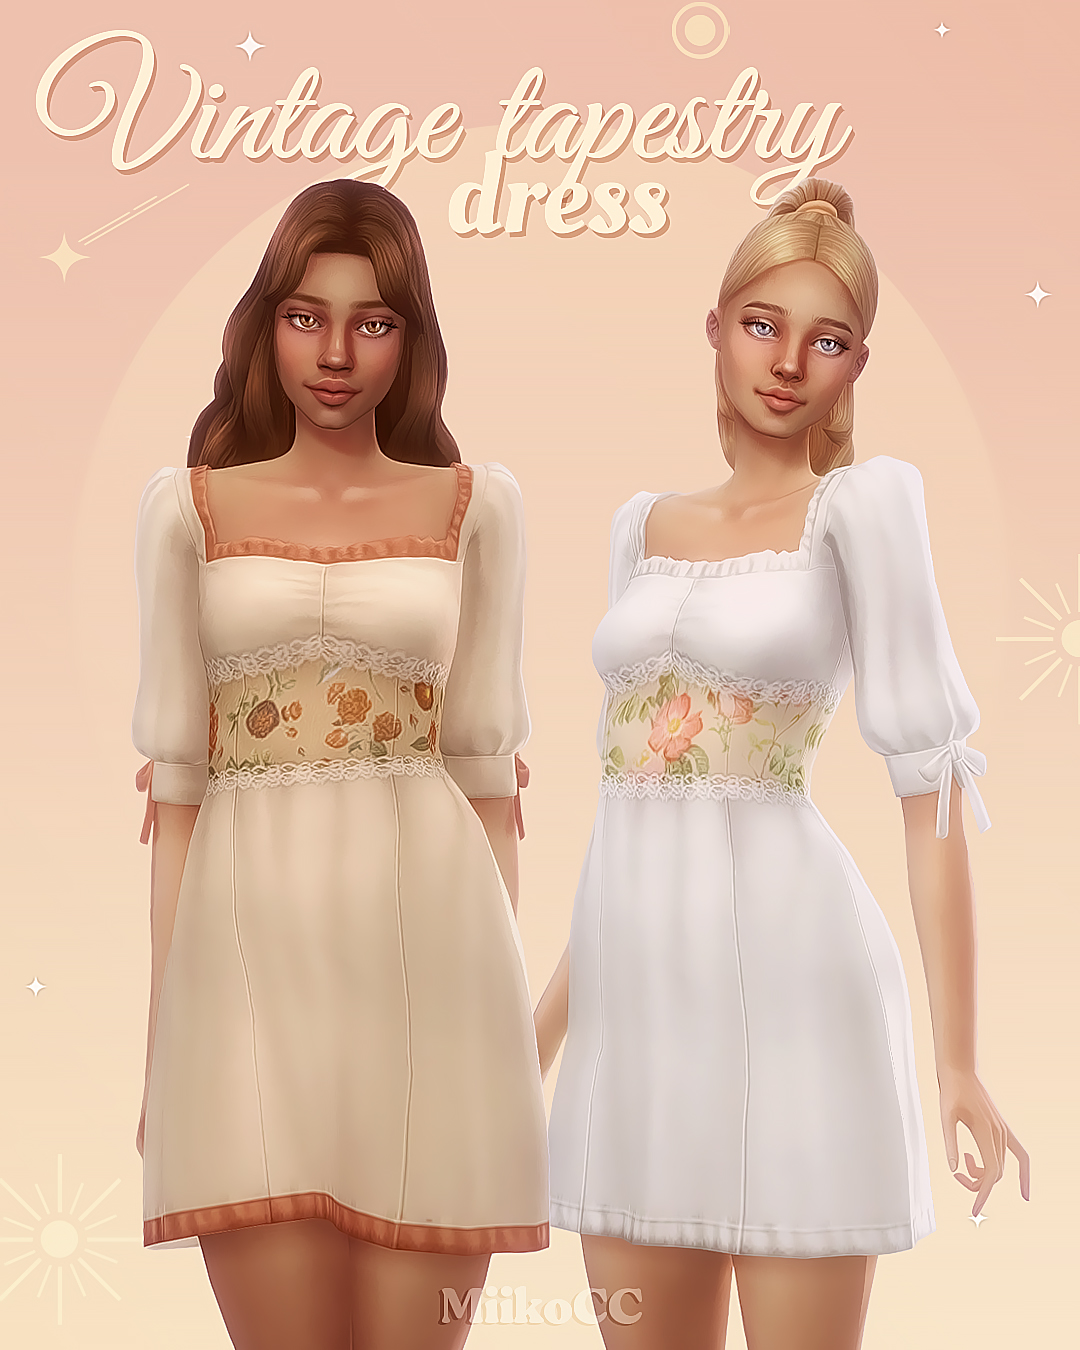 Vintage Tapestry Dress The Sims 4 Create A Sim Curseforge